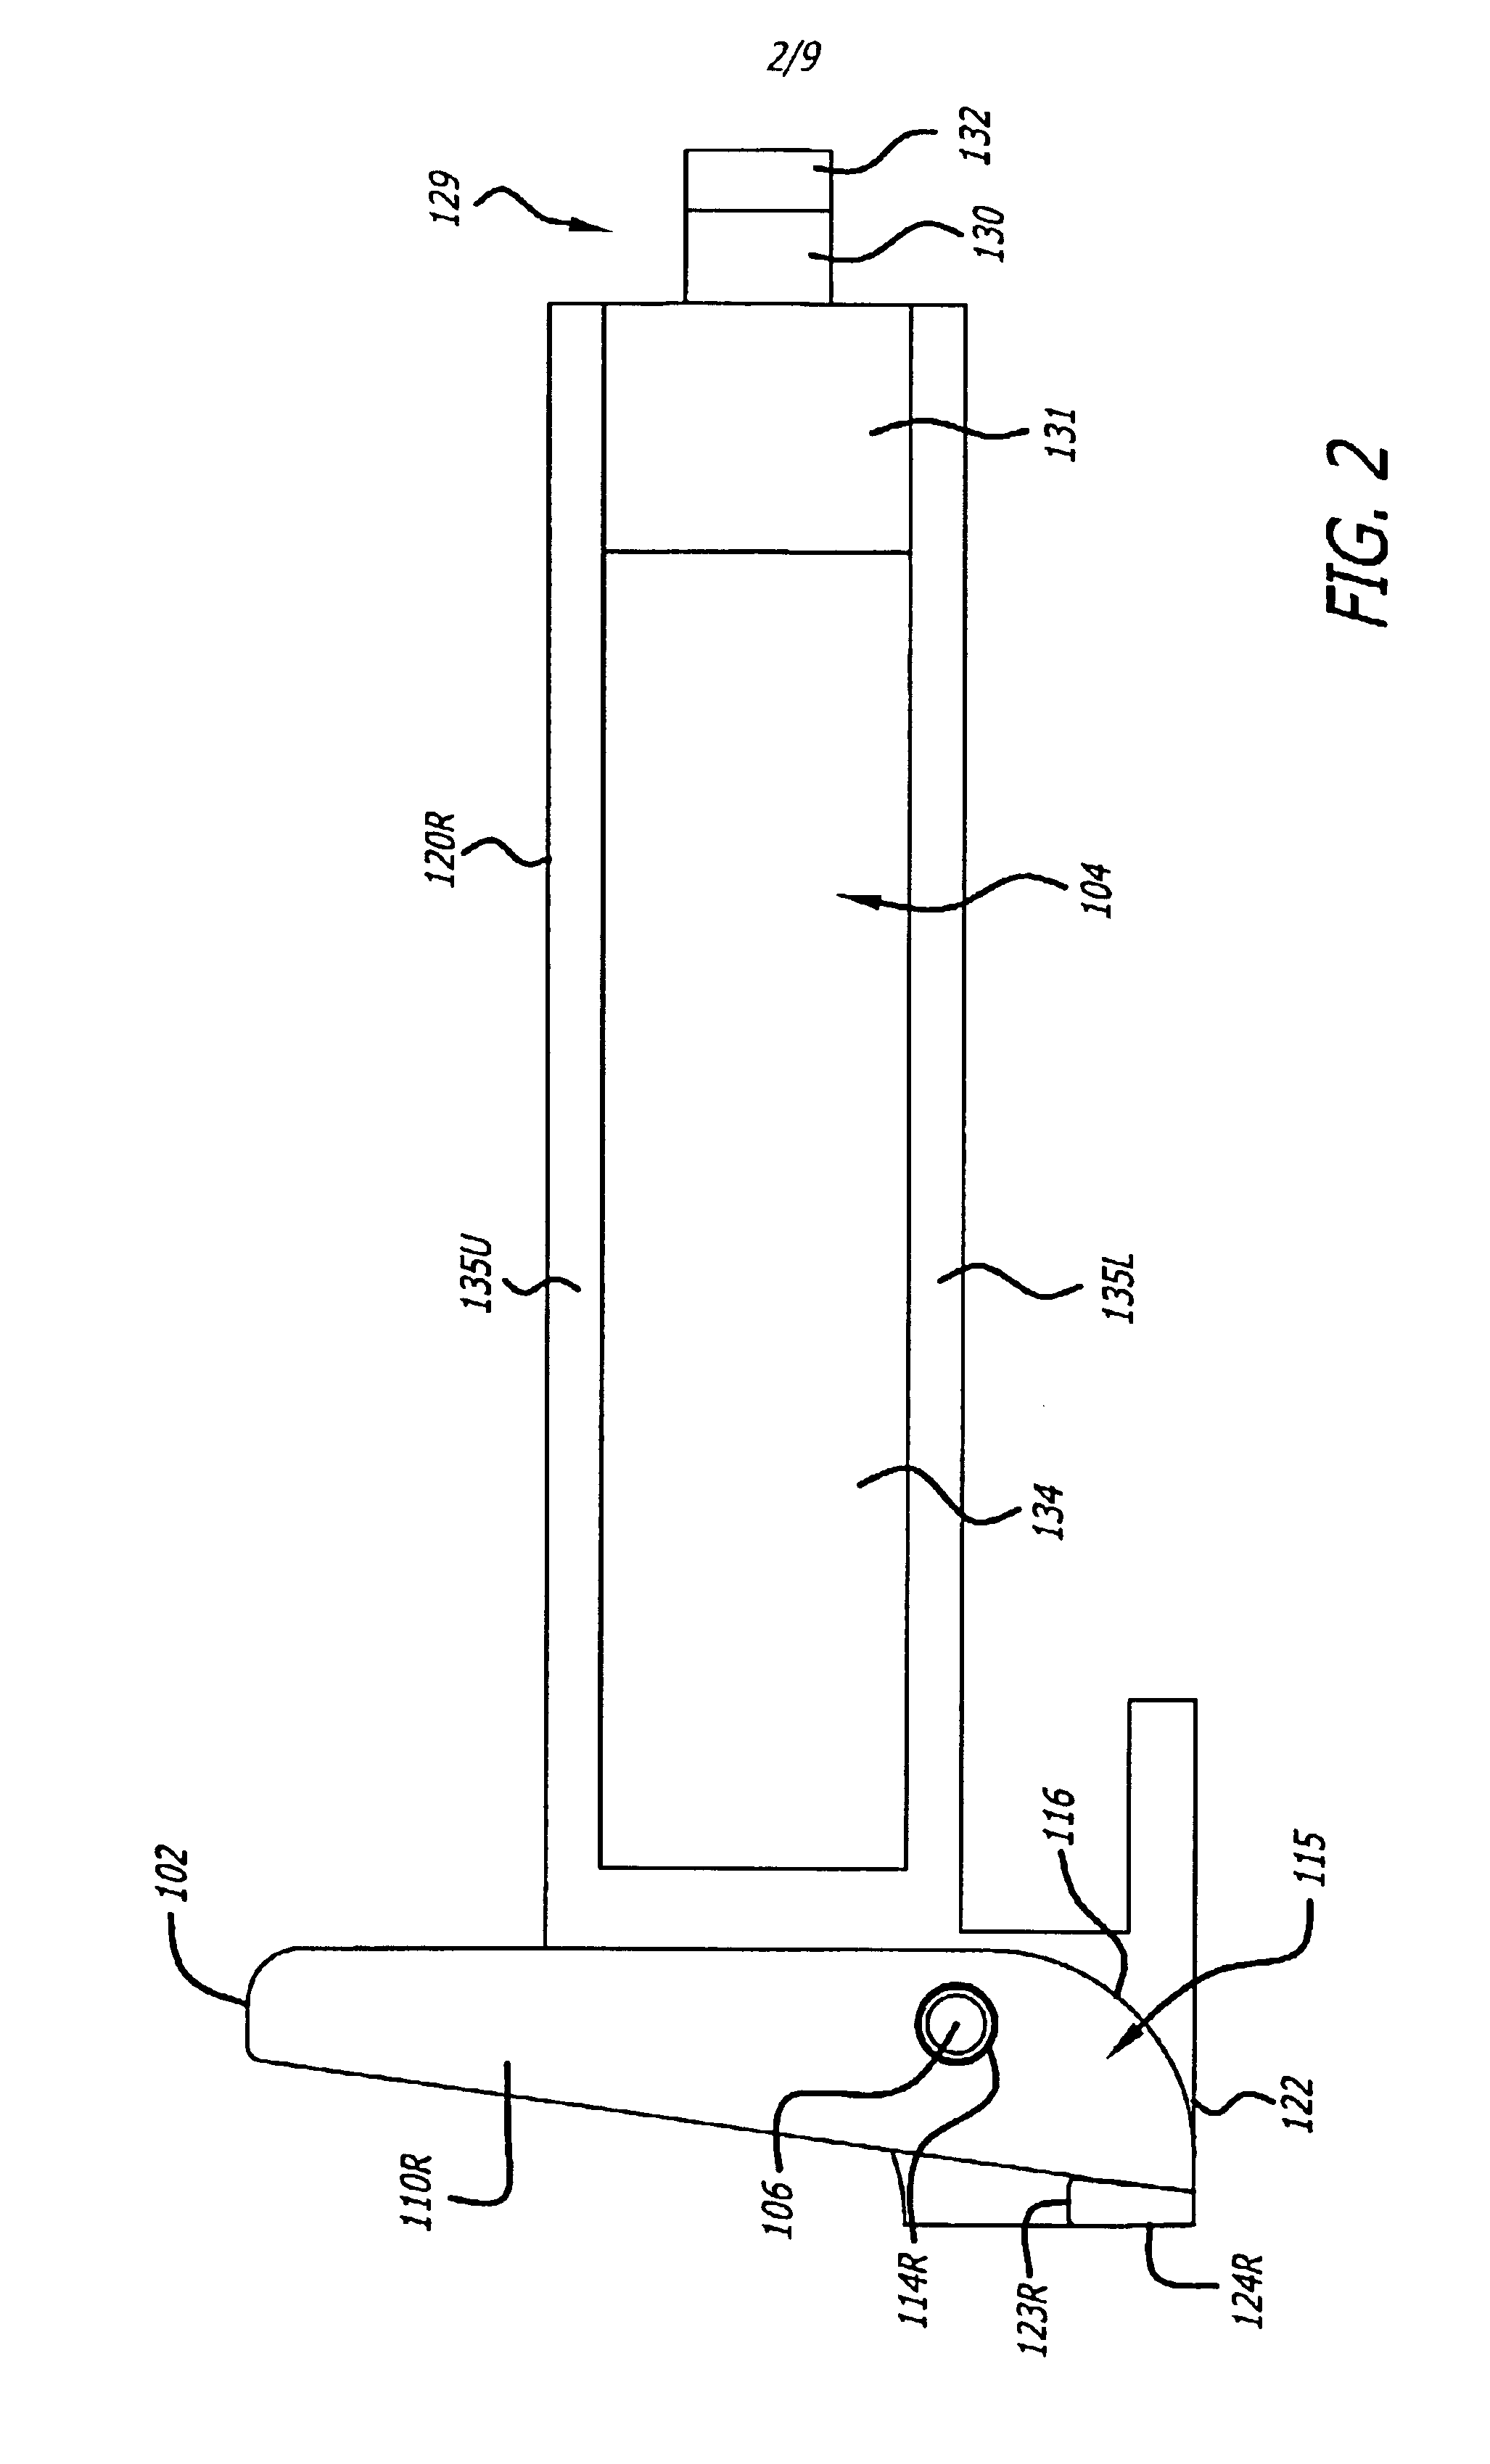 Cam-follower release mechanism for fiber optic modules with side delatching mechanisms